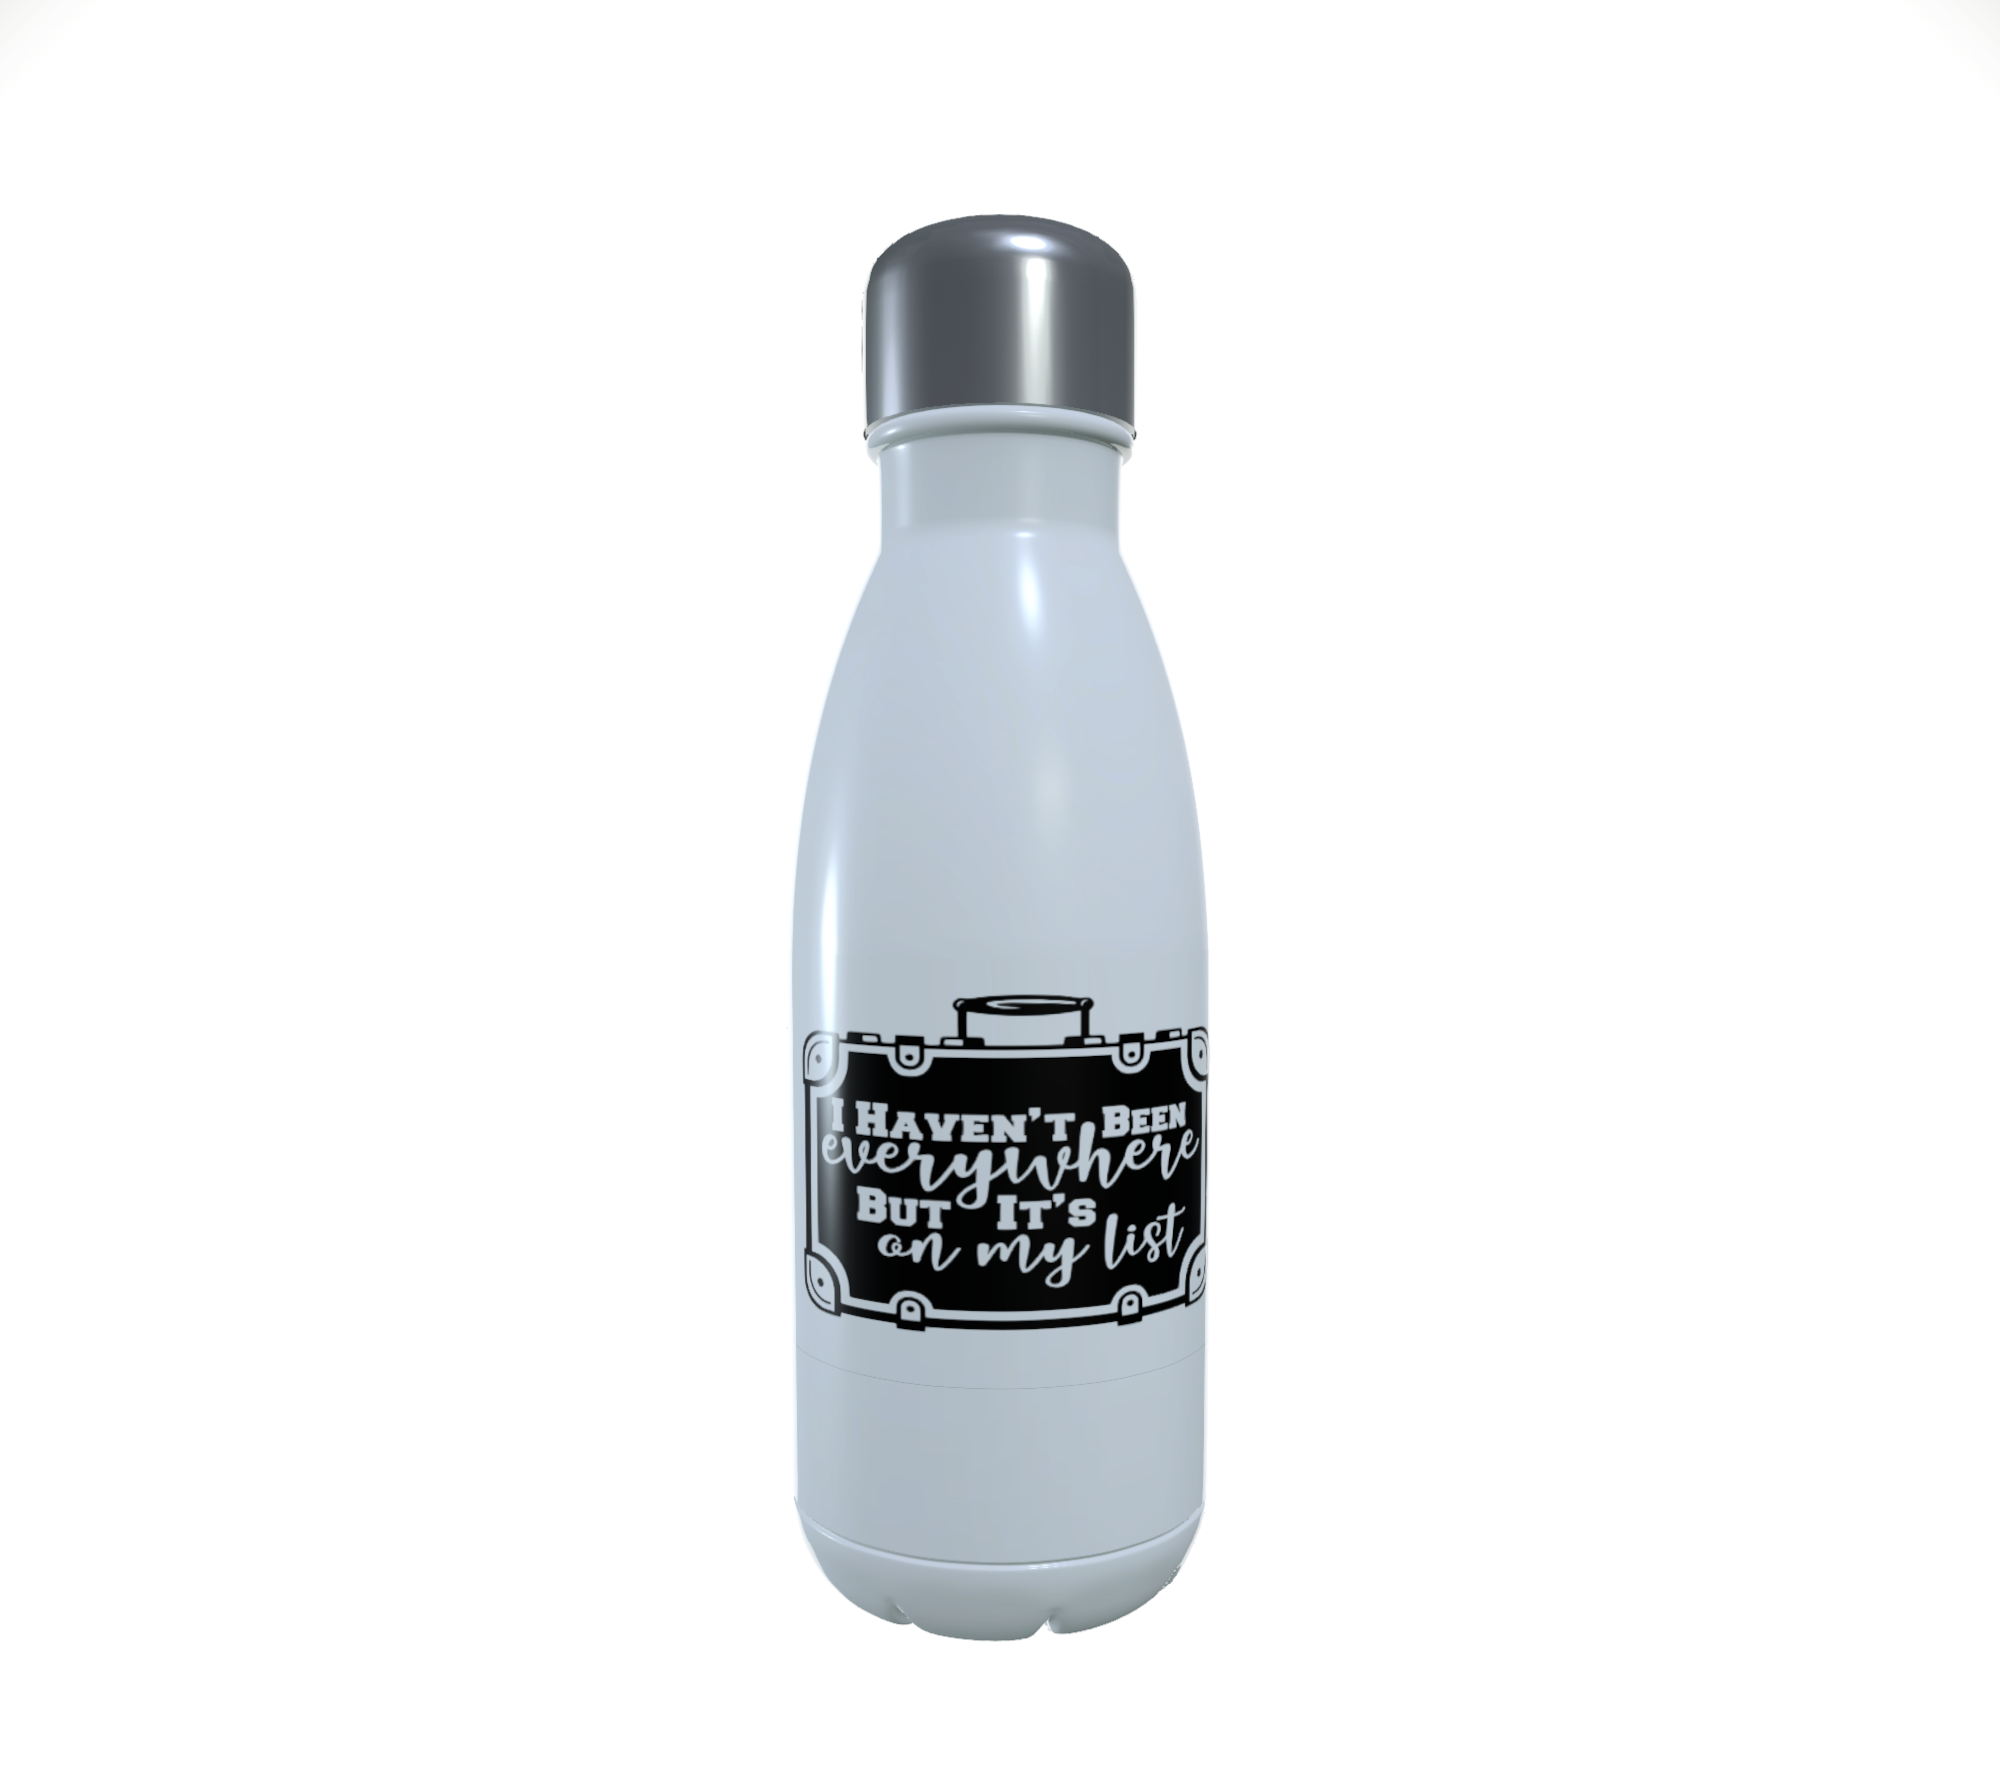 Travelling Drinks Bottle - I haven't been everywhere. Insulated